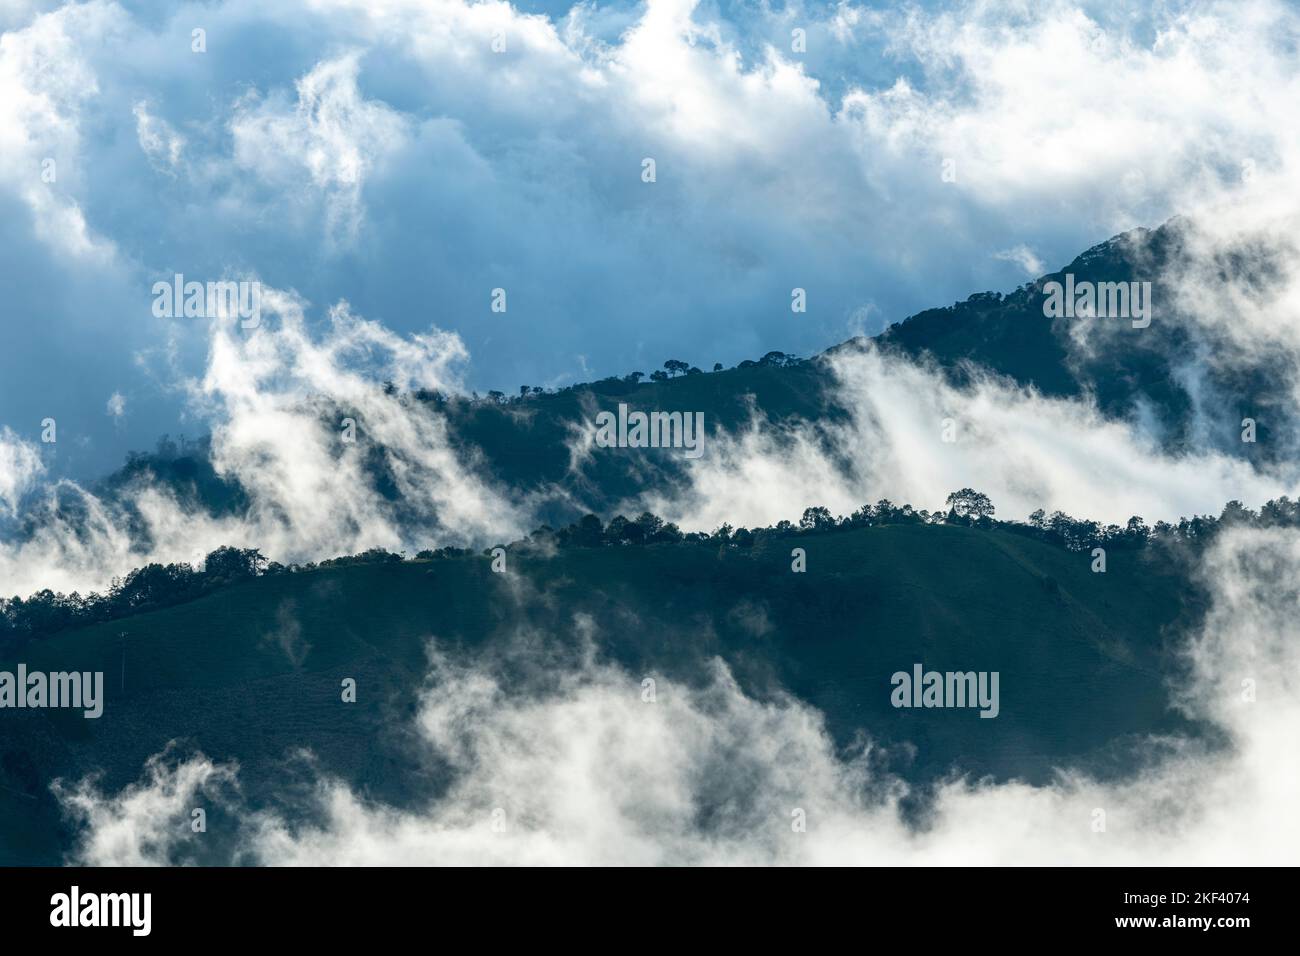 Scenic view of Andes mountains in a cloudy day, Manizales, Caldas, Antioquia, Colombia - stock photo Stock Photo